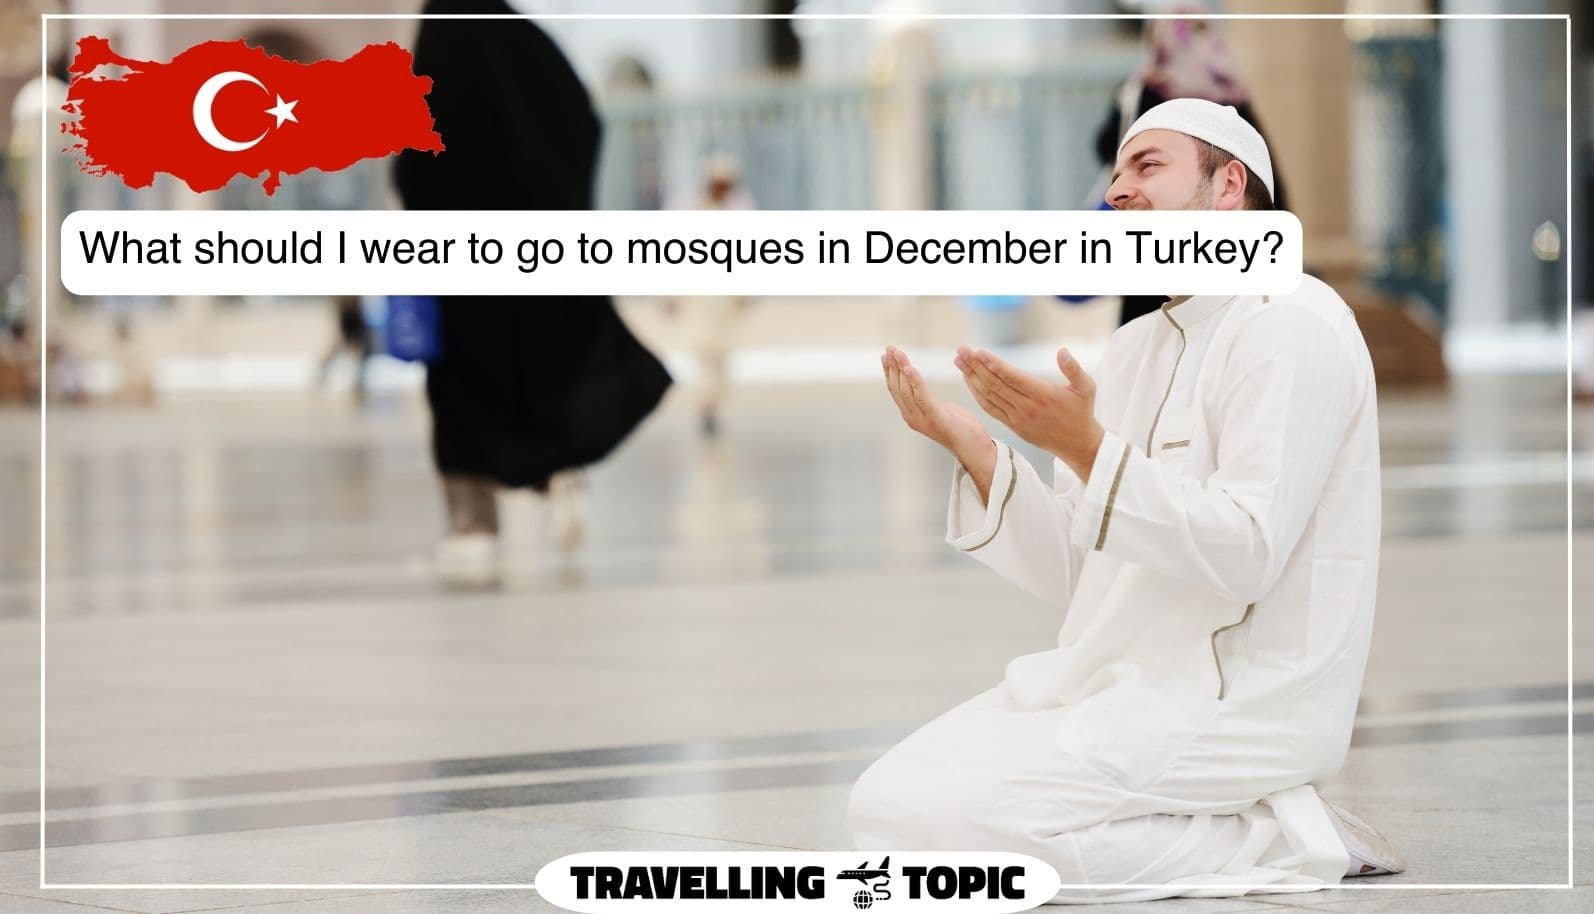 What should I wear to go to mosques in December in Turkey